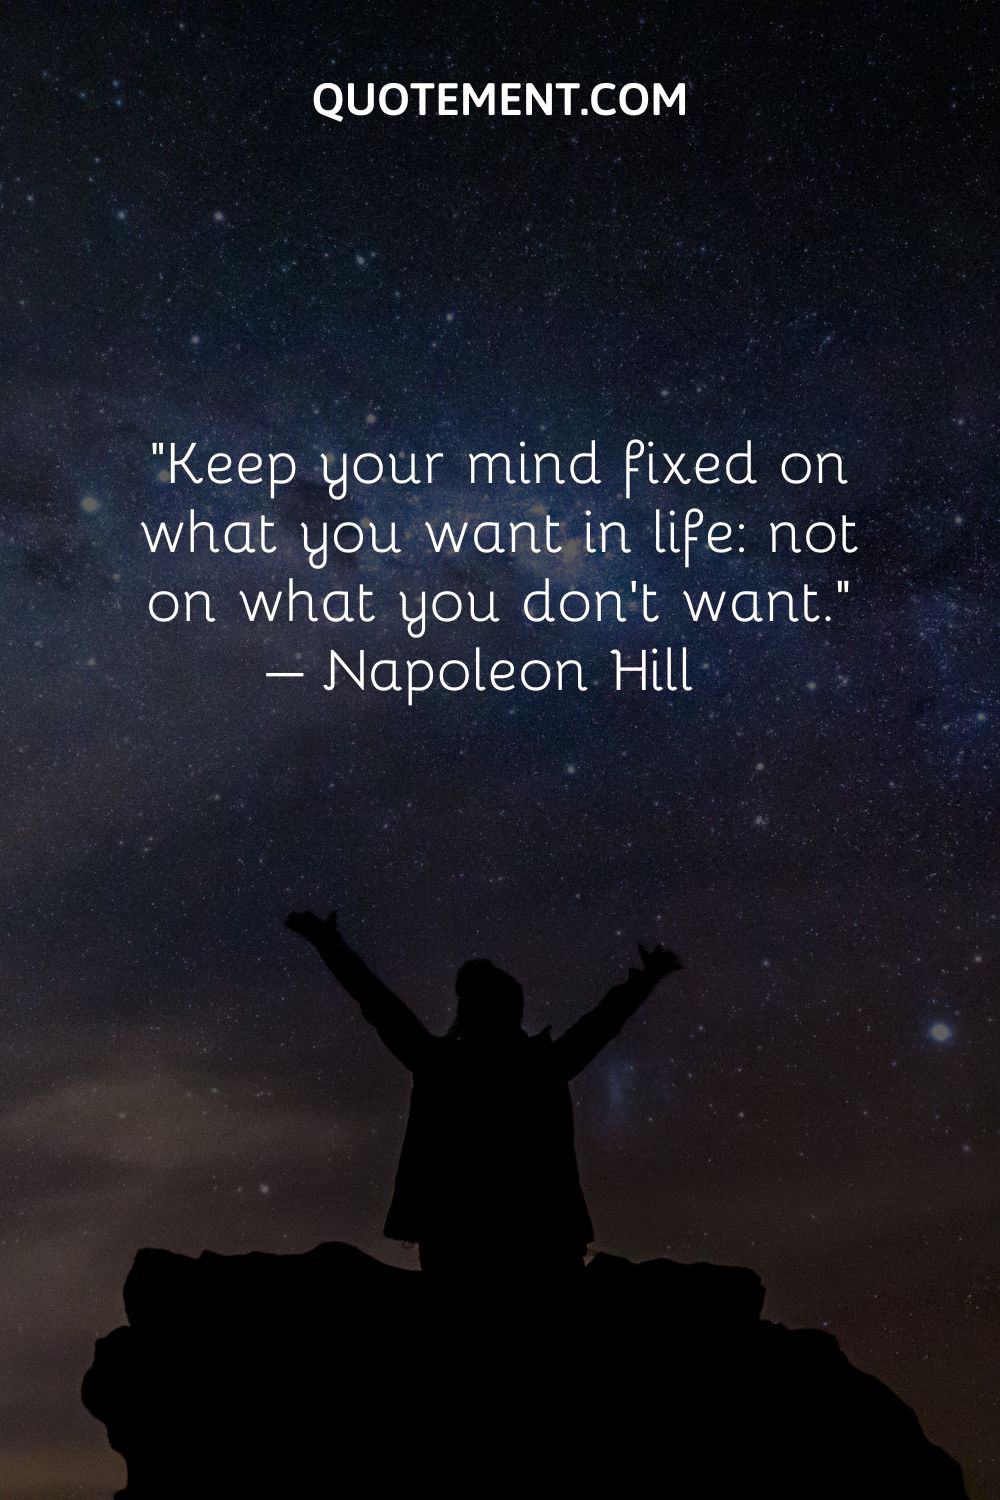 Keep your mind fixed on what you want in life